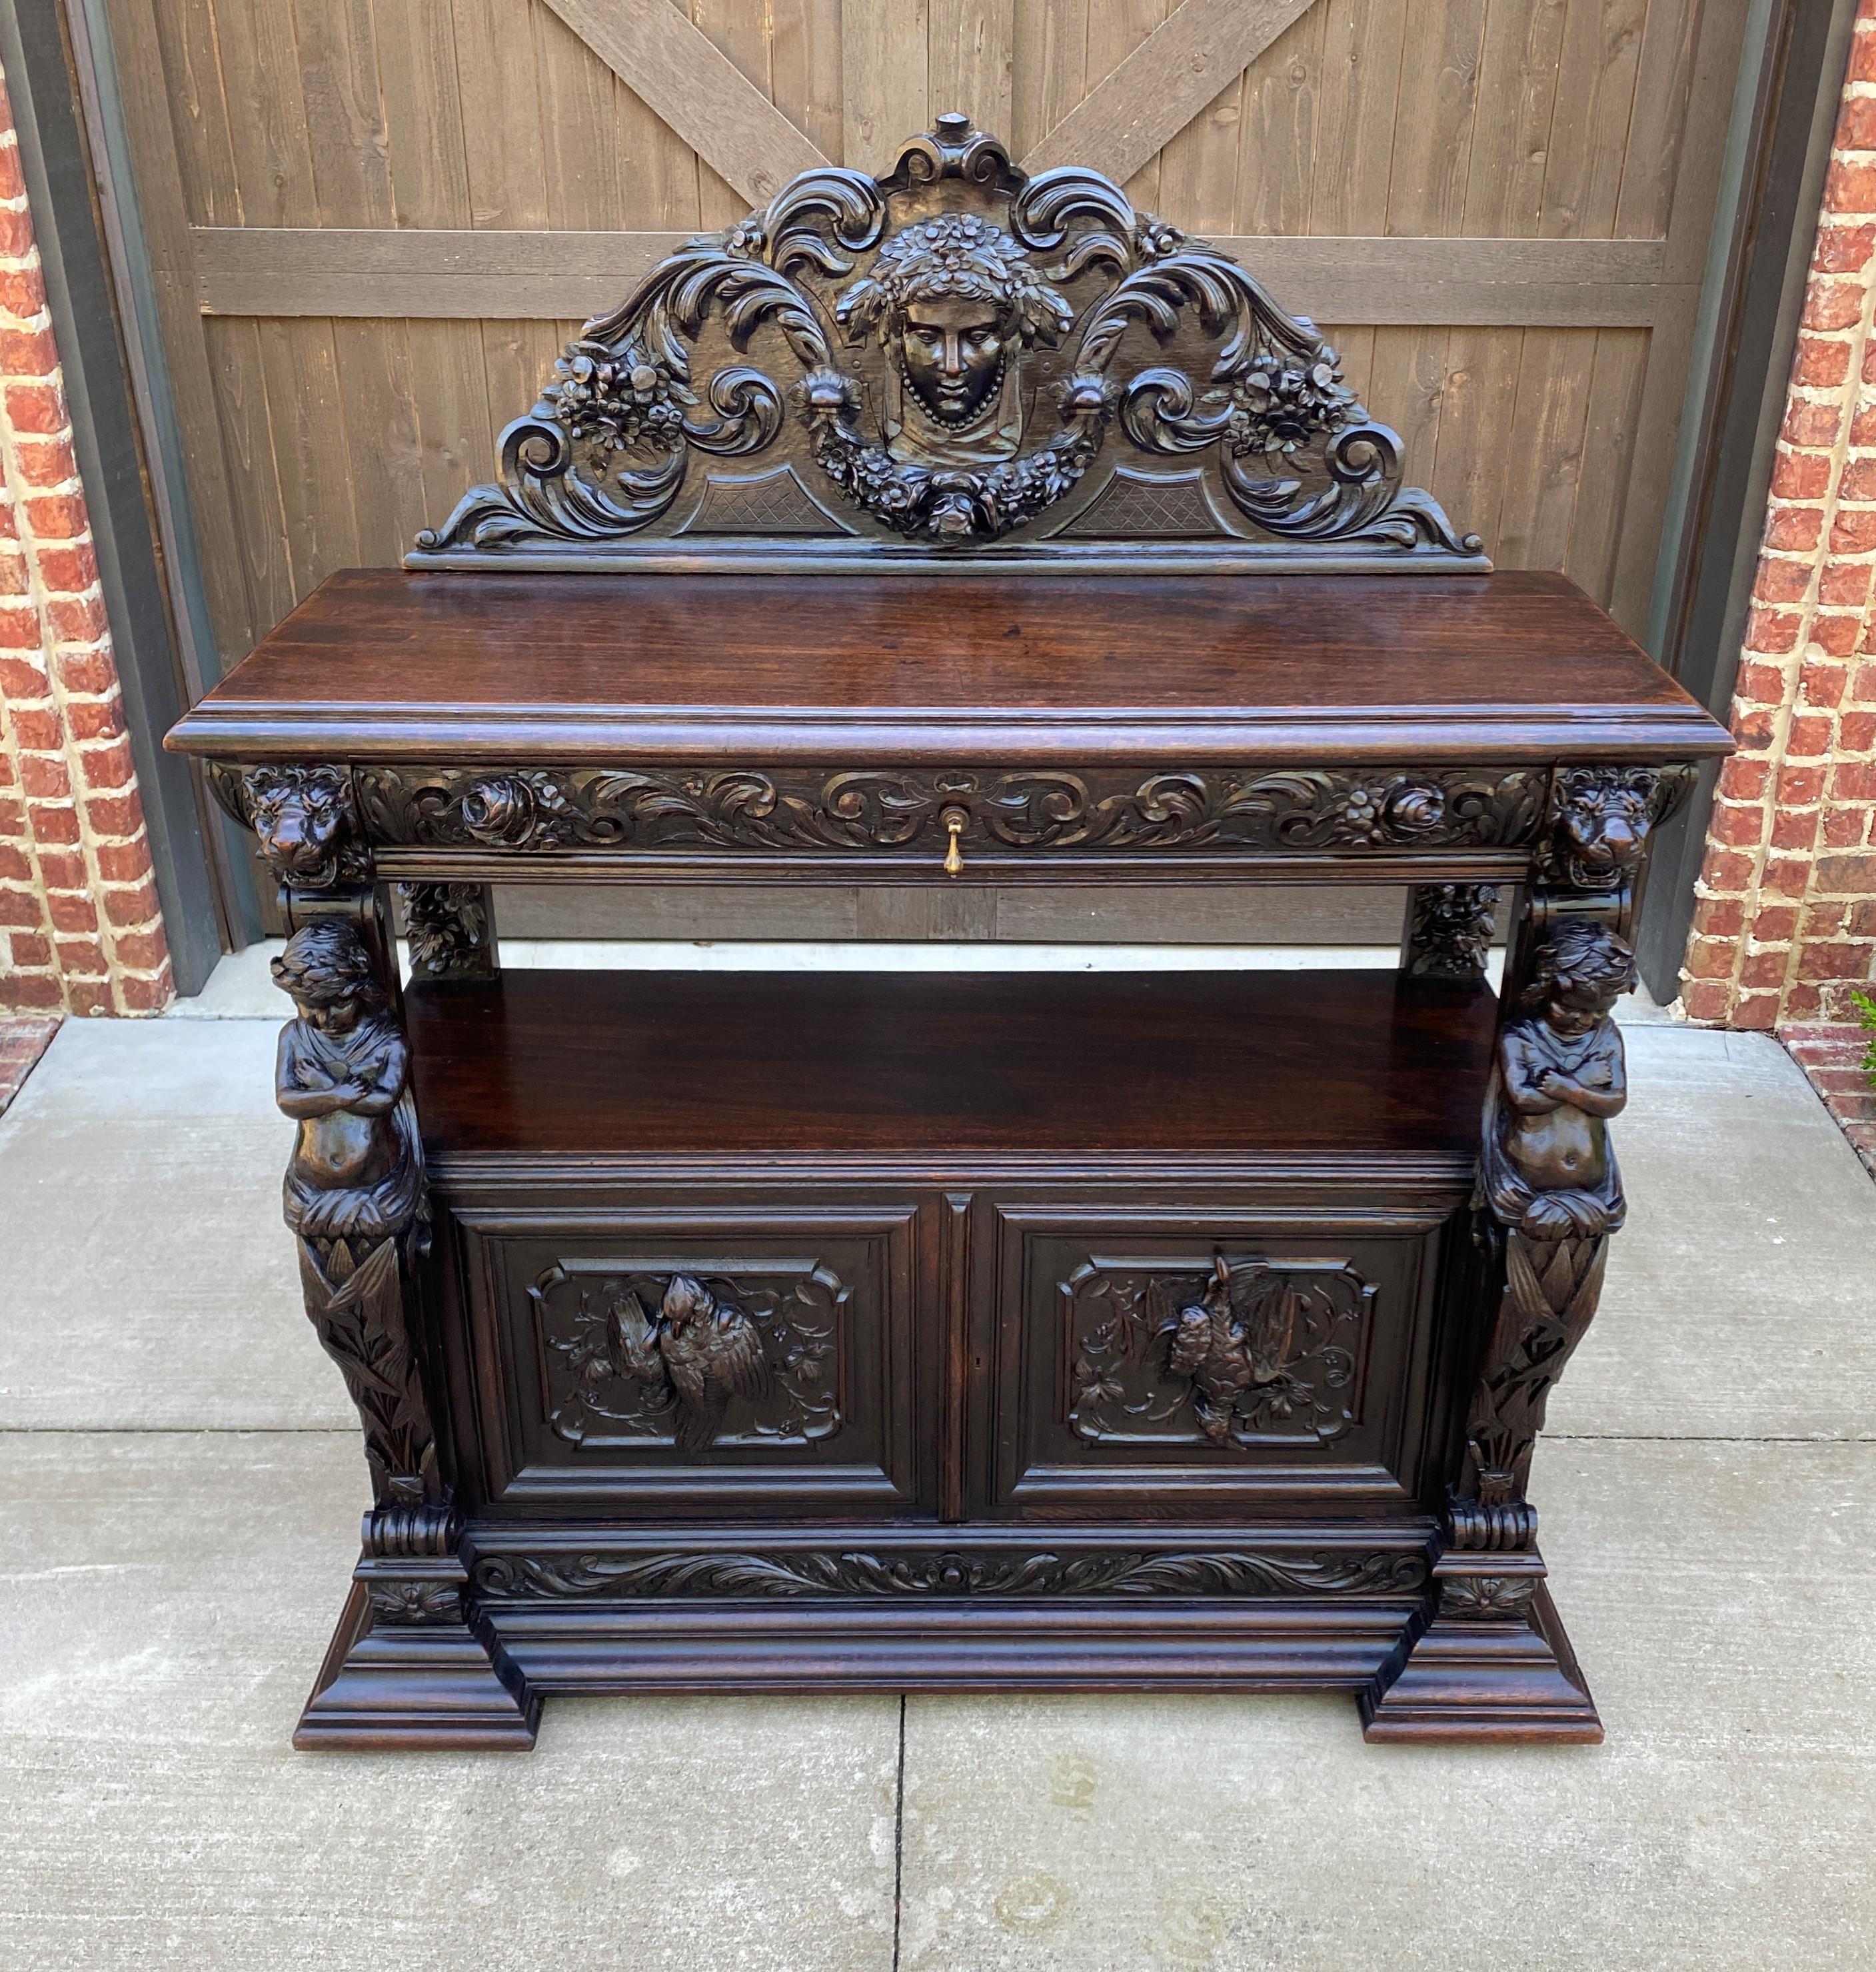 EXQUISITE Antique French GOTHIC REVIVAL Highly Carved Oak Sideboard/Server/Buffet/Cabinet~~c. 1850s

 HIGHLY CARVED antique French Gothic Revival oak sideboard, buffet, server, or cabinet with a beautifully carved mask crown, cherub supports,